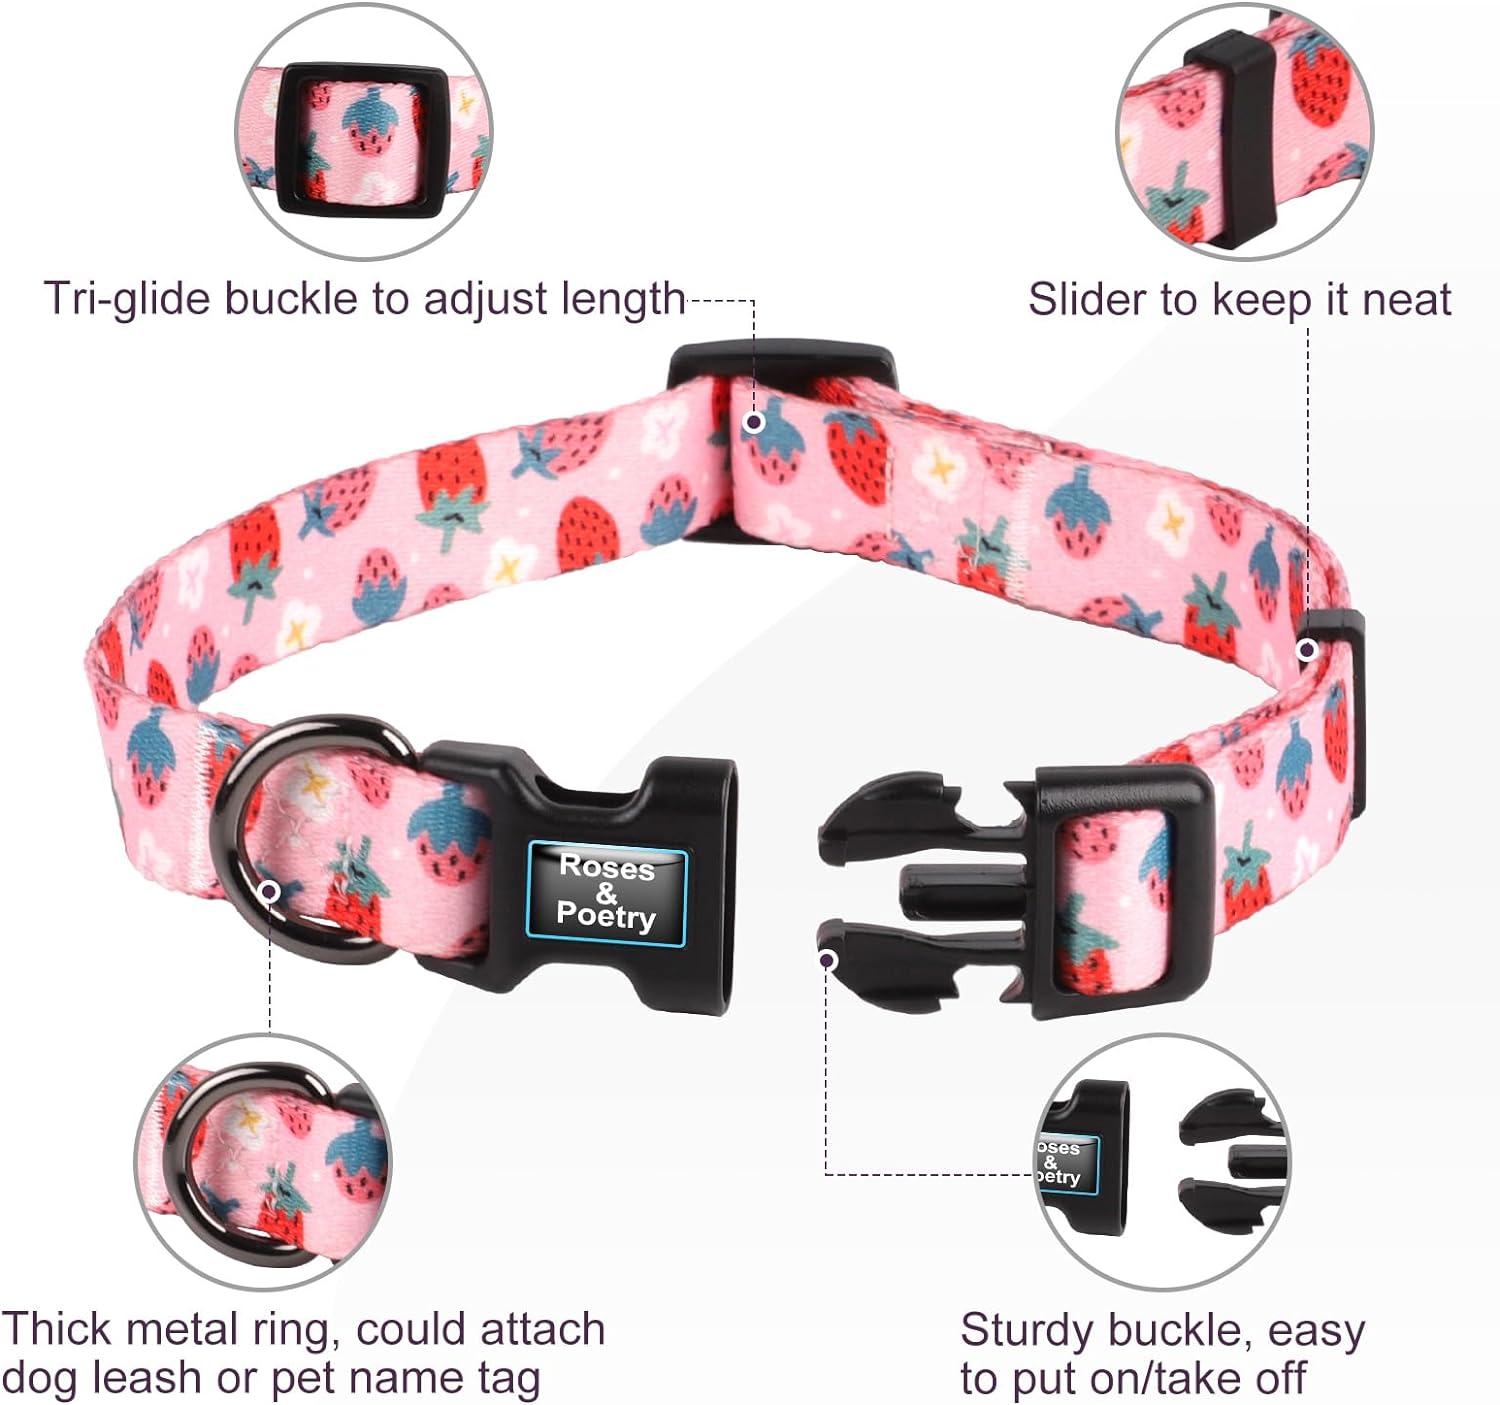 RosesPoetry Reflective Dog Collar with Gradient Mistyrose, Adjustable Durable Pet Collars for Small Medium Large Dogs (Mistyrose-S)